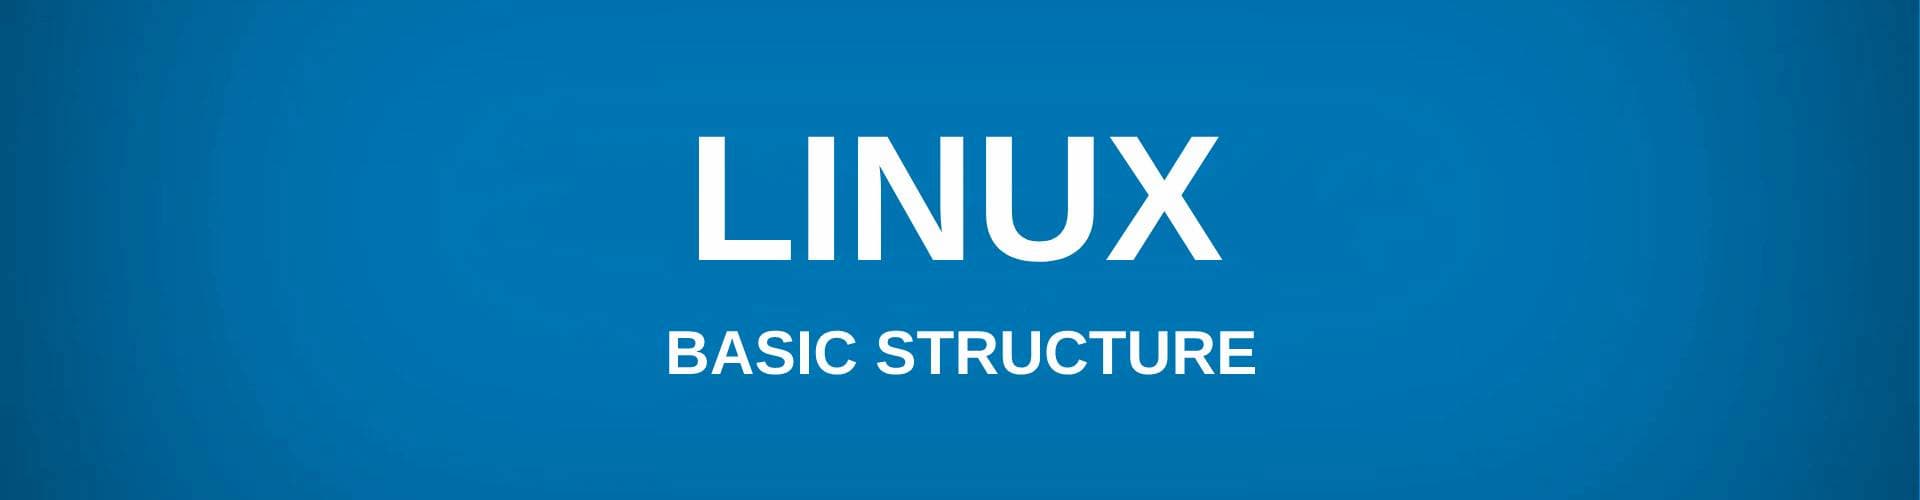 linux-basic-structure